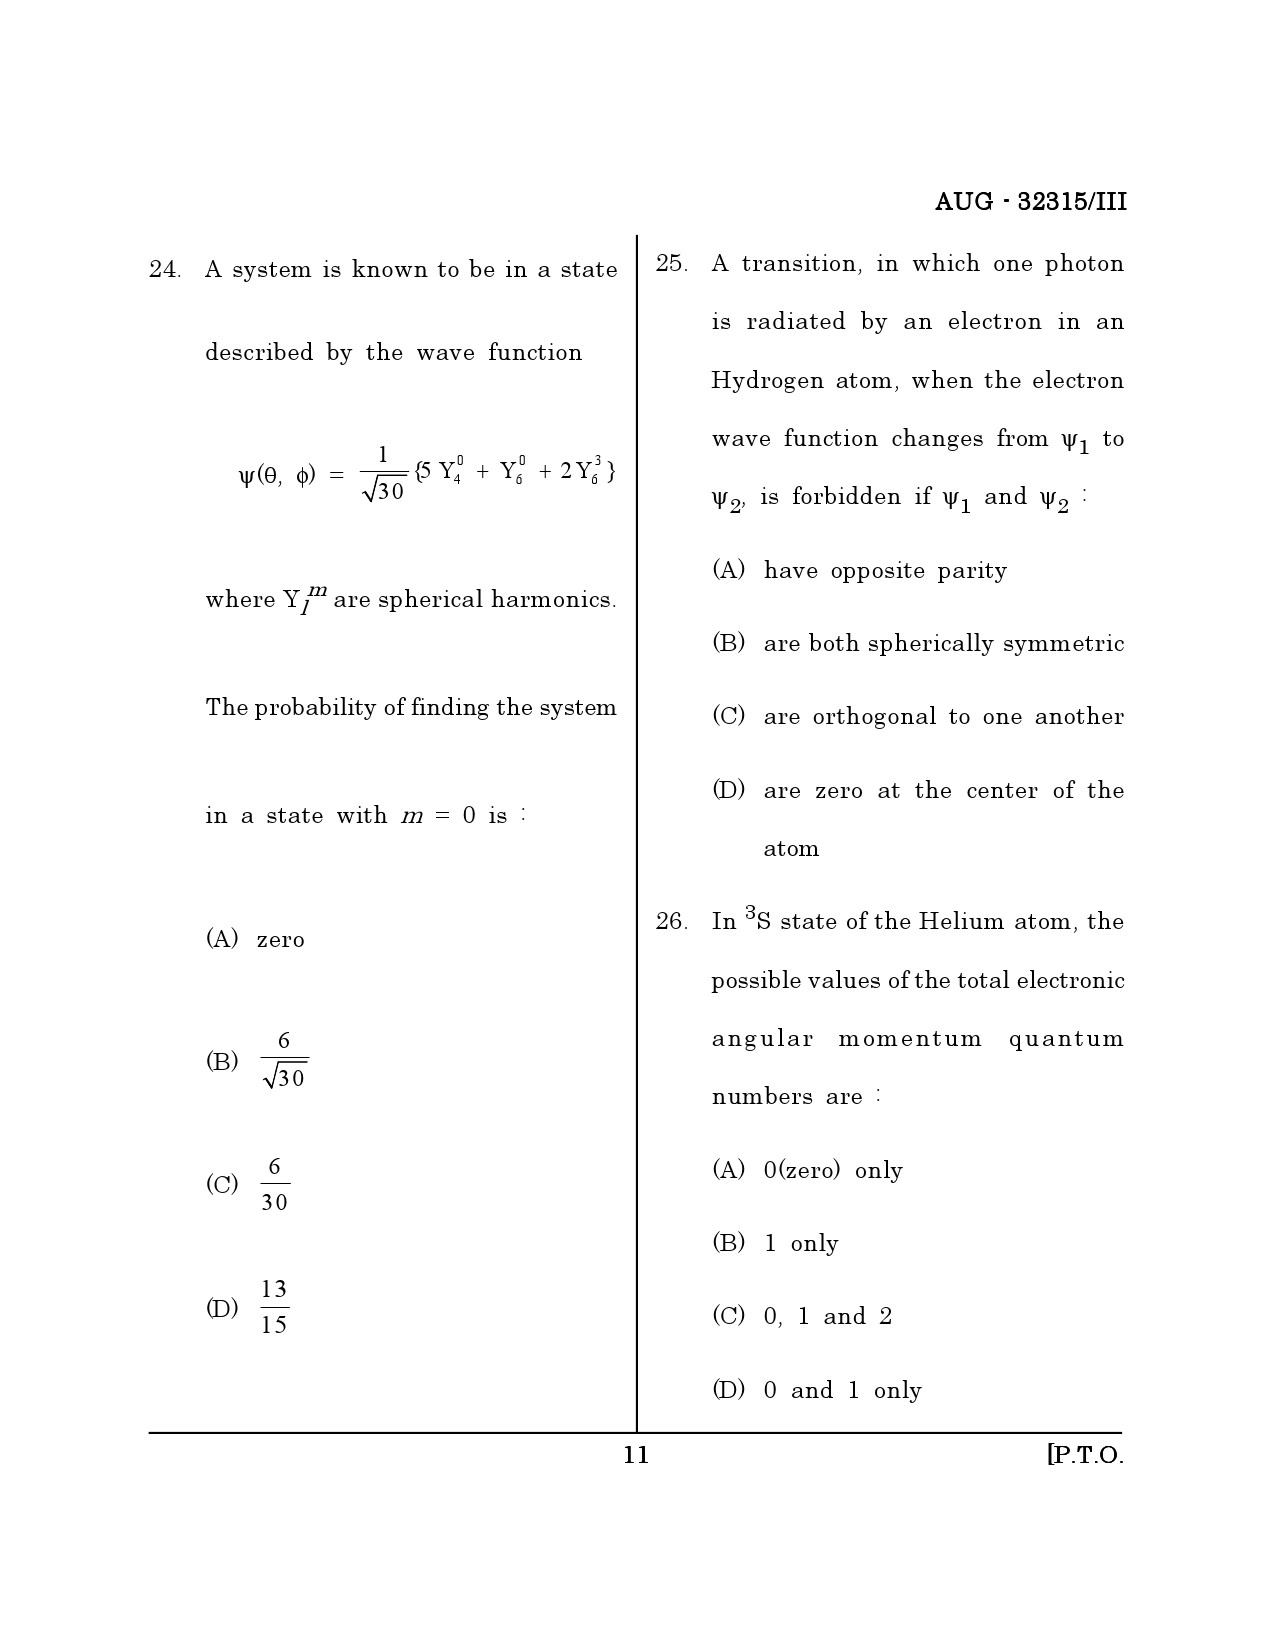 Maharashtra SET Physical Science Question Paper III August 2015 10